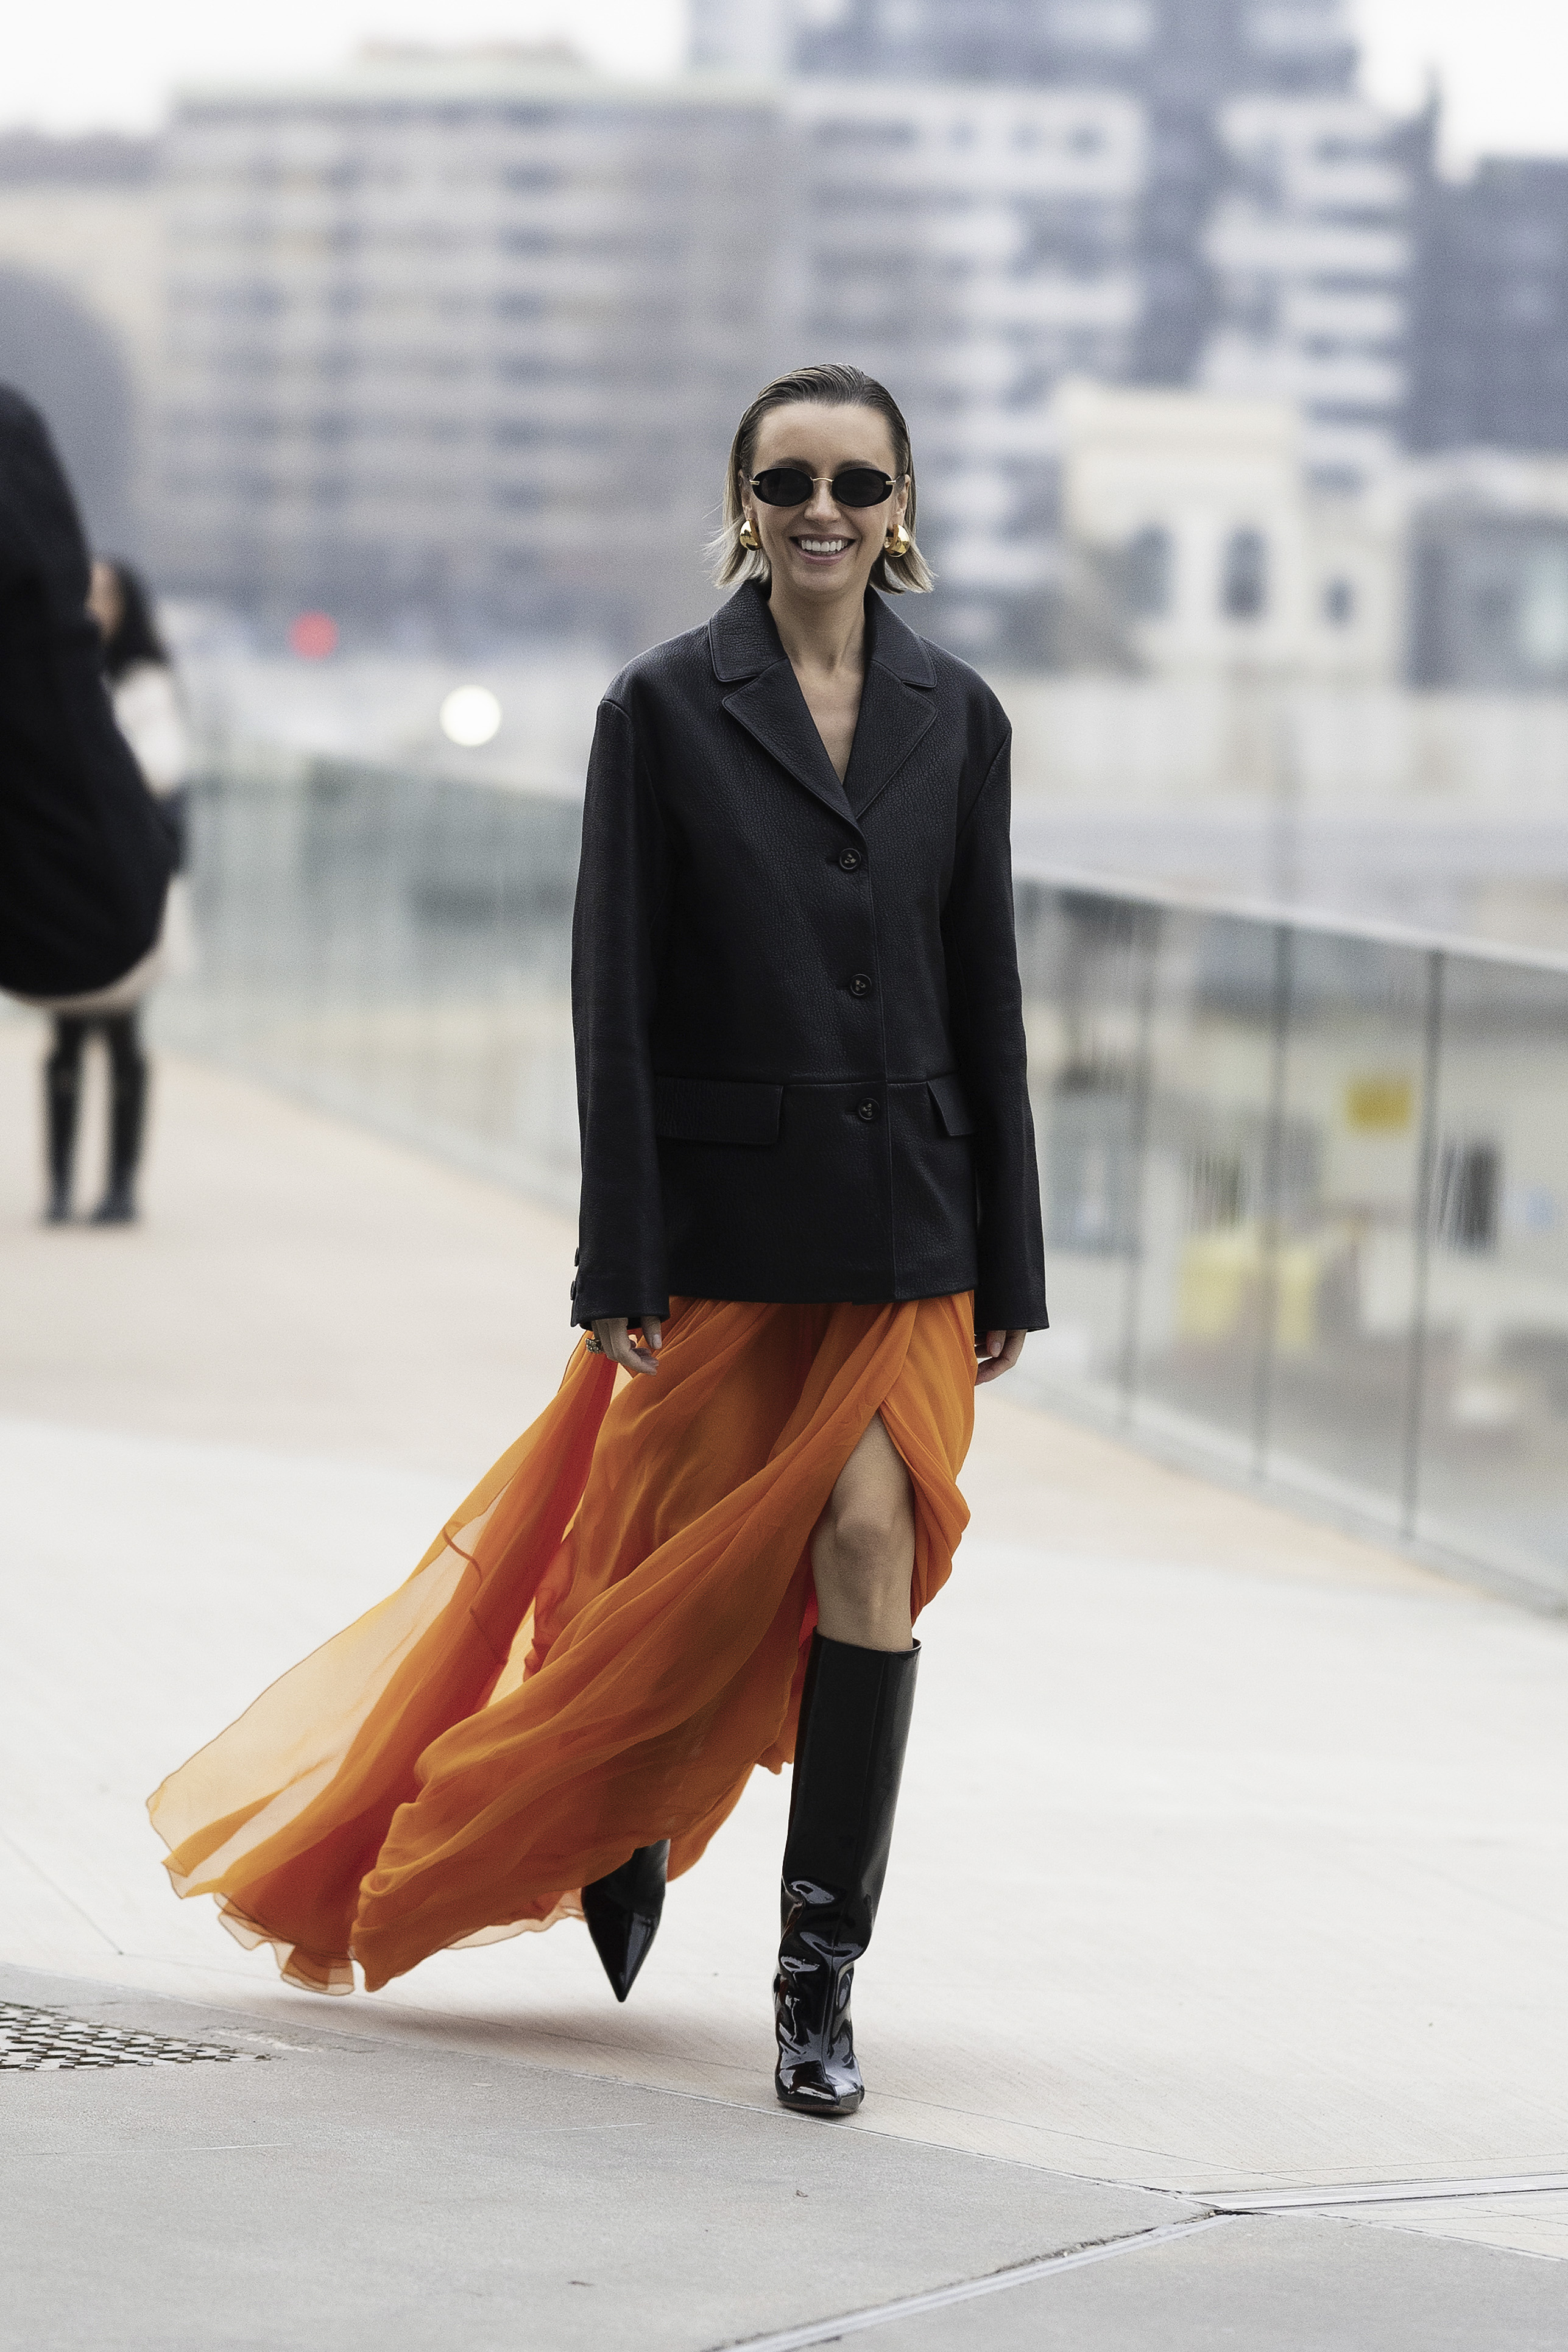 An insider with a blazer and long dress in the 'street-style'.